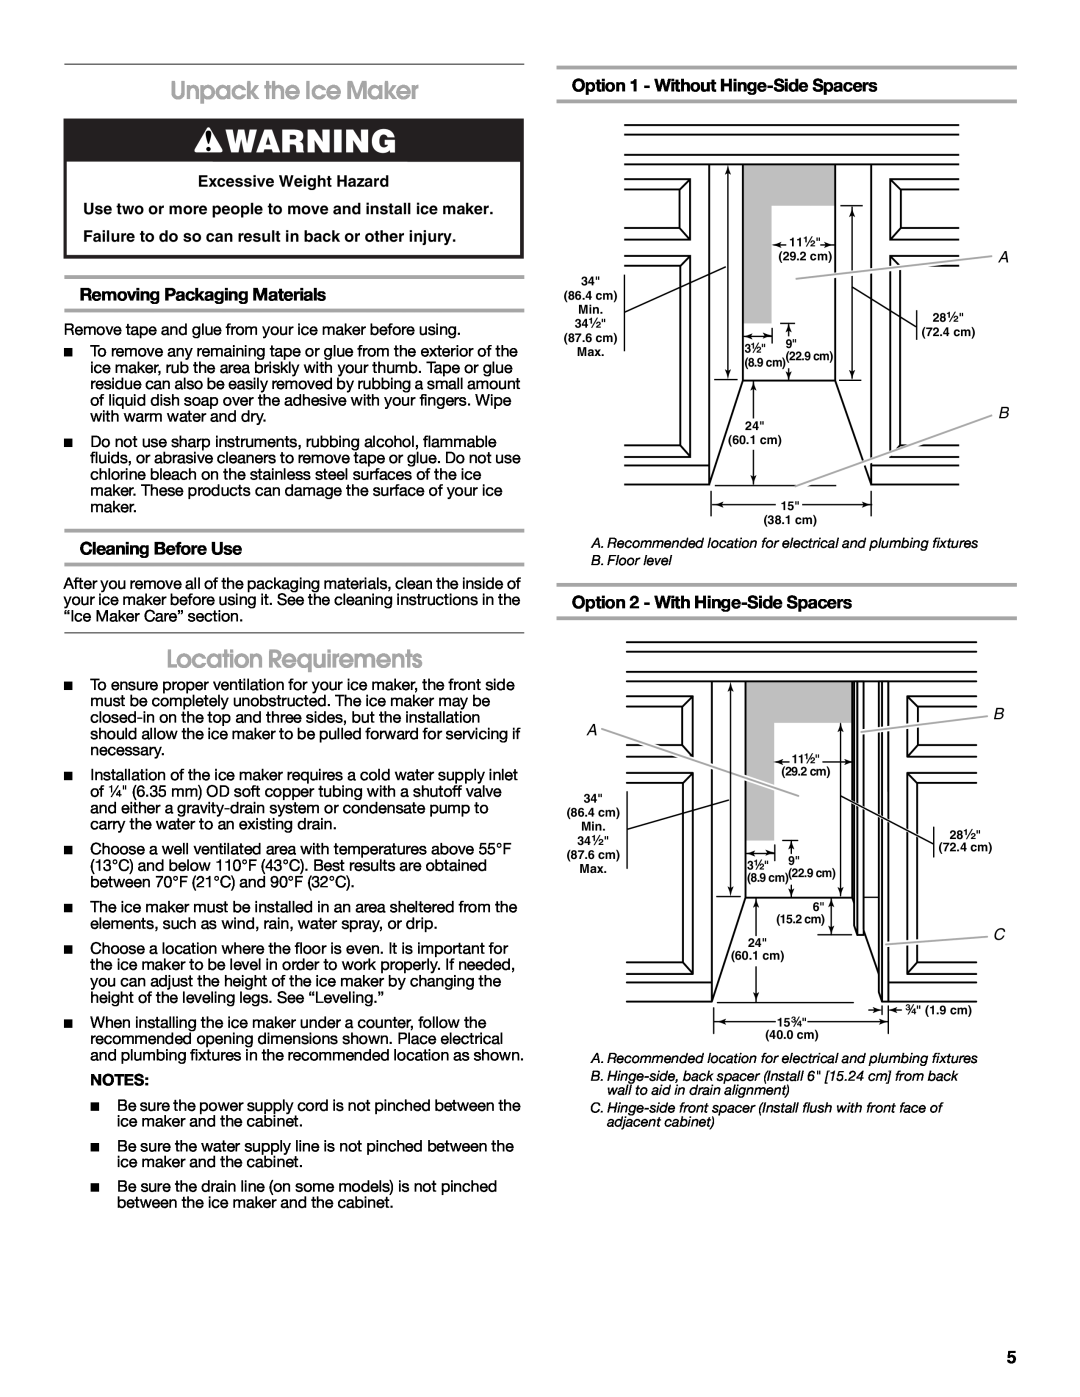 Jenn-Air W10282143B manual Unpack the Ice Maker, Location Requirements, Option 1 - Without Hinge-Side Spacers 